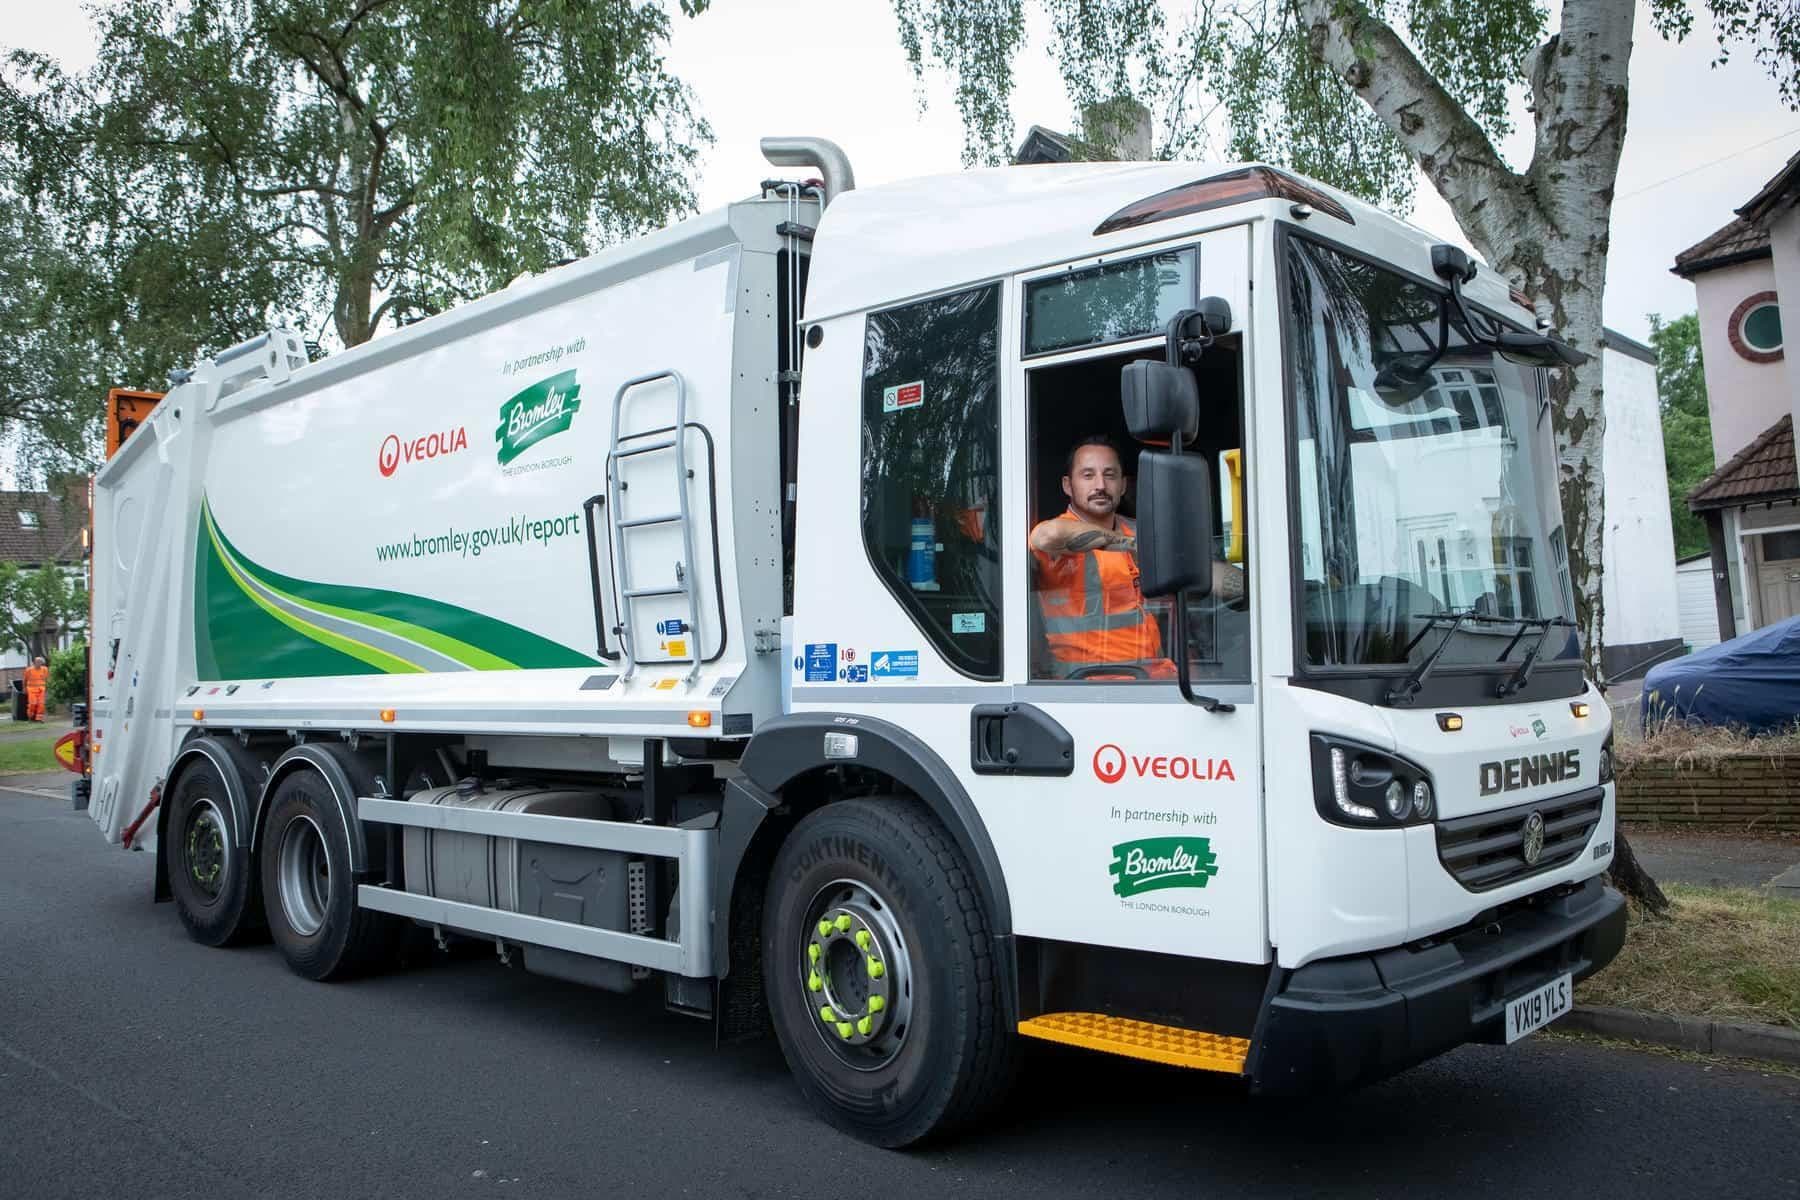 Orpington 1st teams up with Veolia for commercial waste management